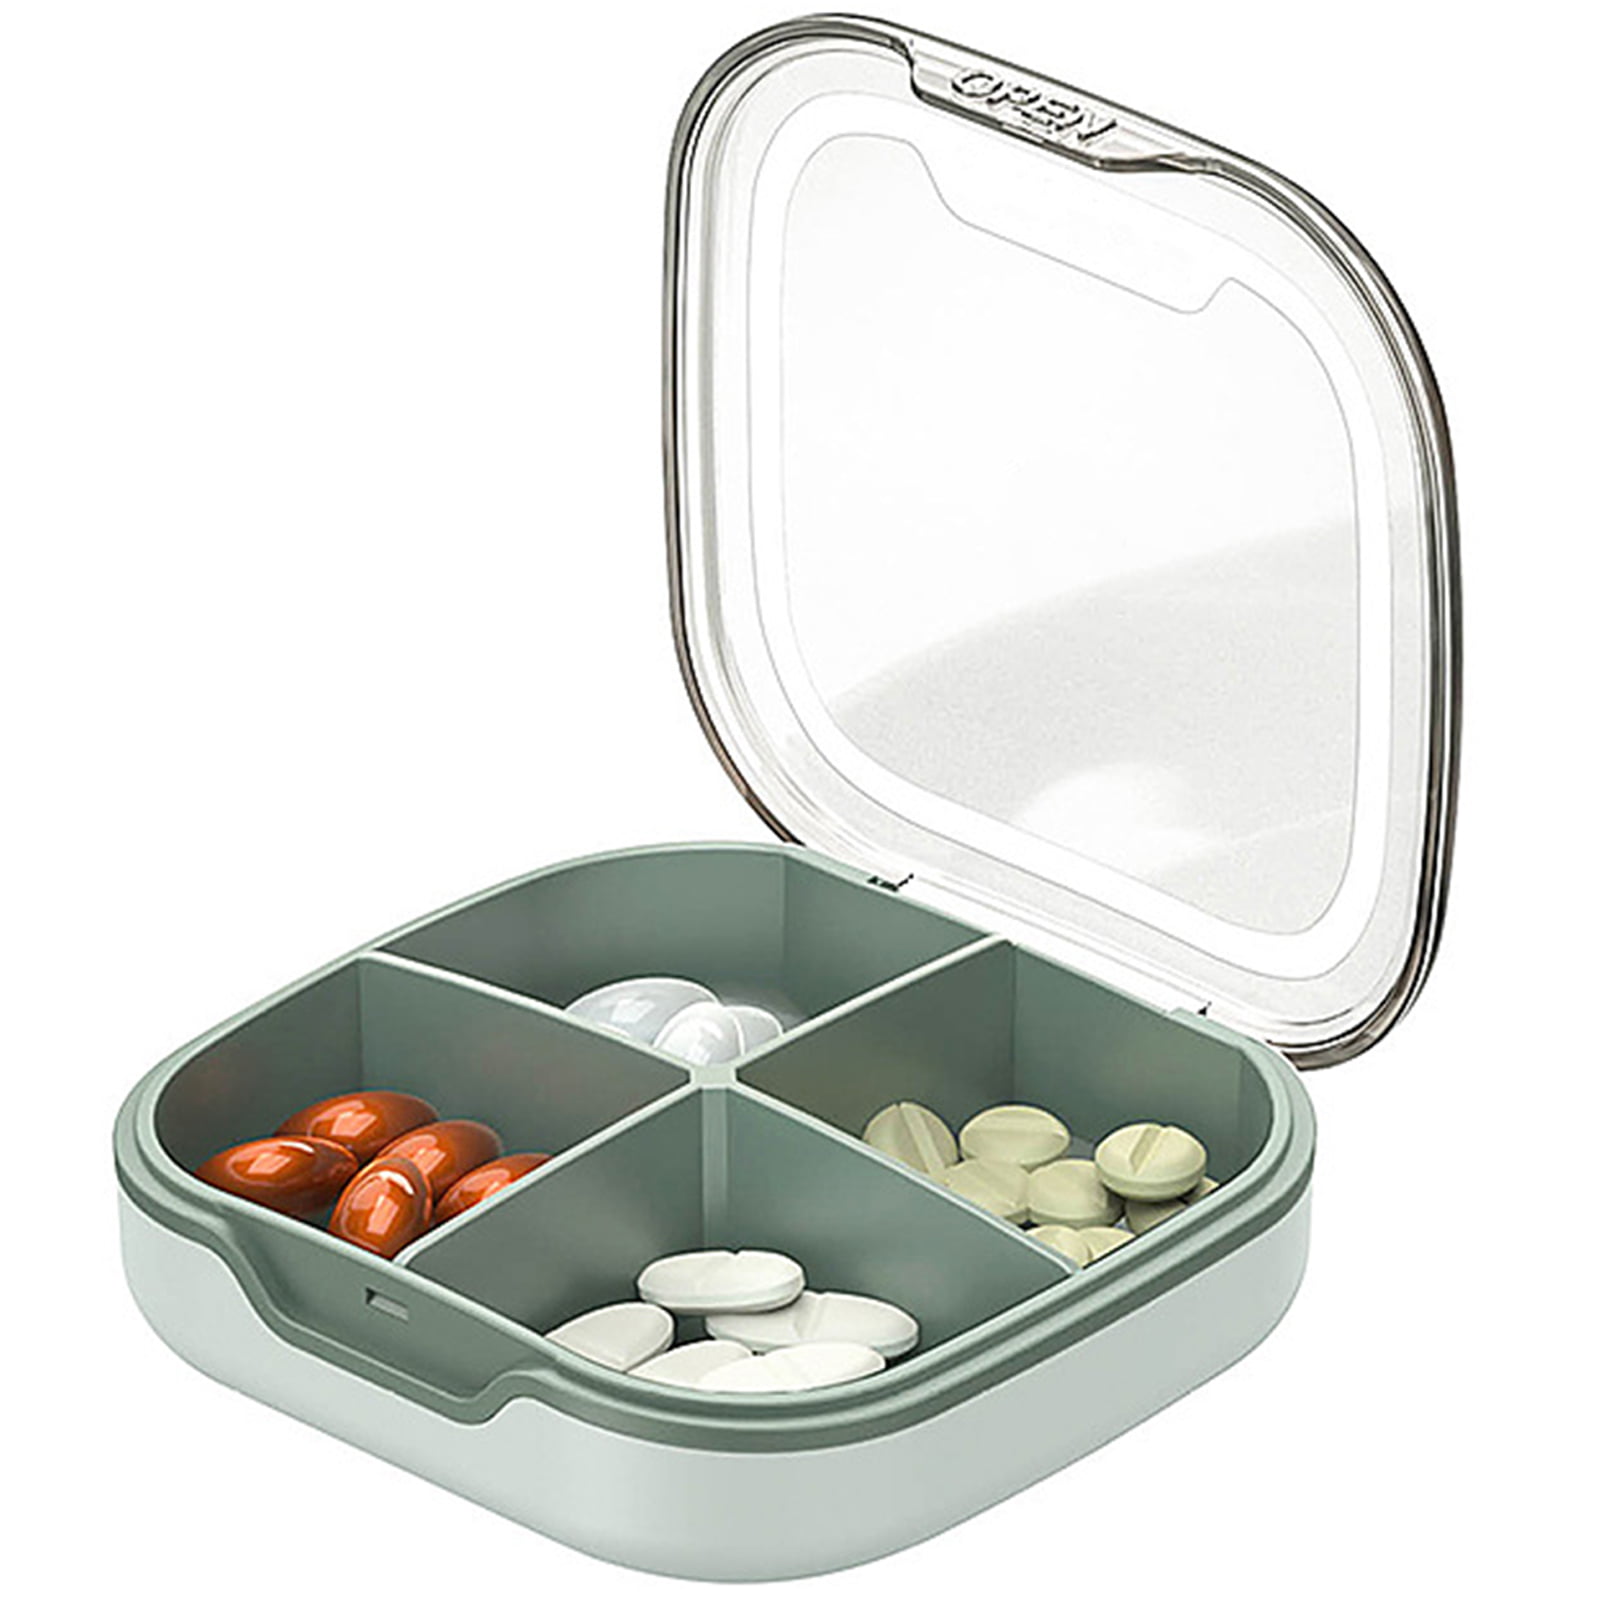 Small Pill Boxes – Pack of 2 – Mini Compact Round Portable 4 Compartment Travel  Pills Case Organizer, Vitamin and Medication Dispenser Holder for Up to 4  Times a Day, BPA Free Pill Reminder